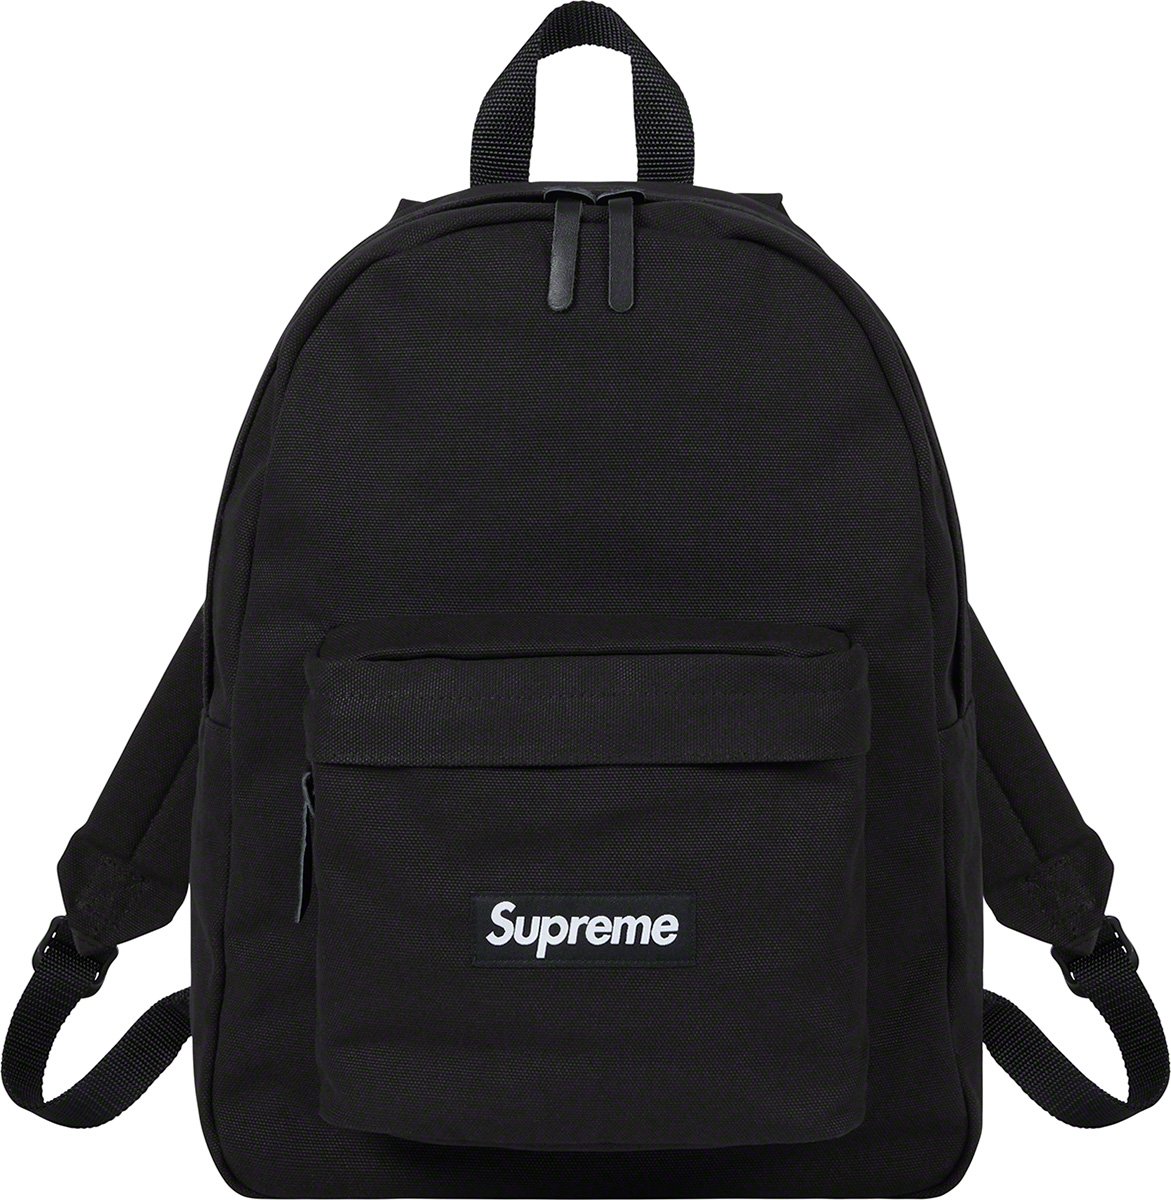 Supreme Canvas Backpack White - FW20/FW21 - US